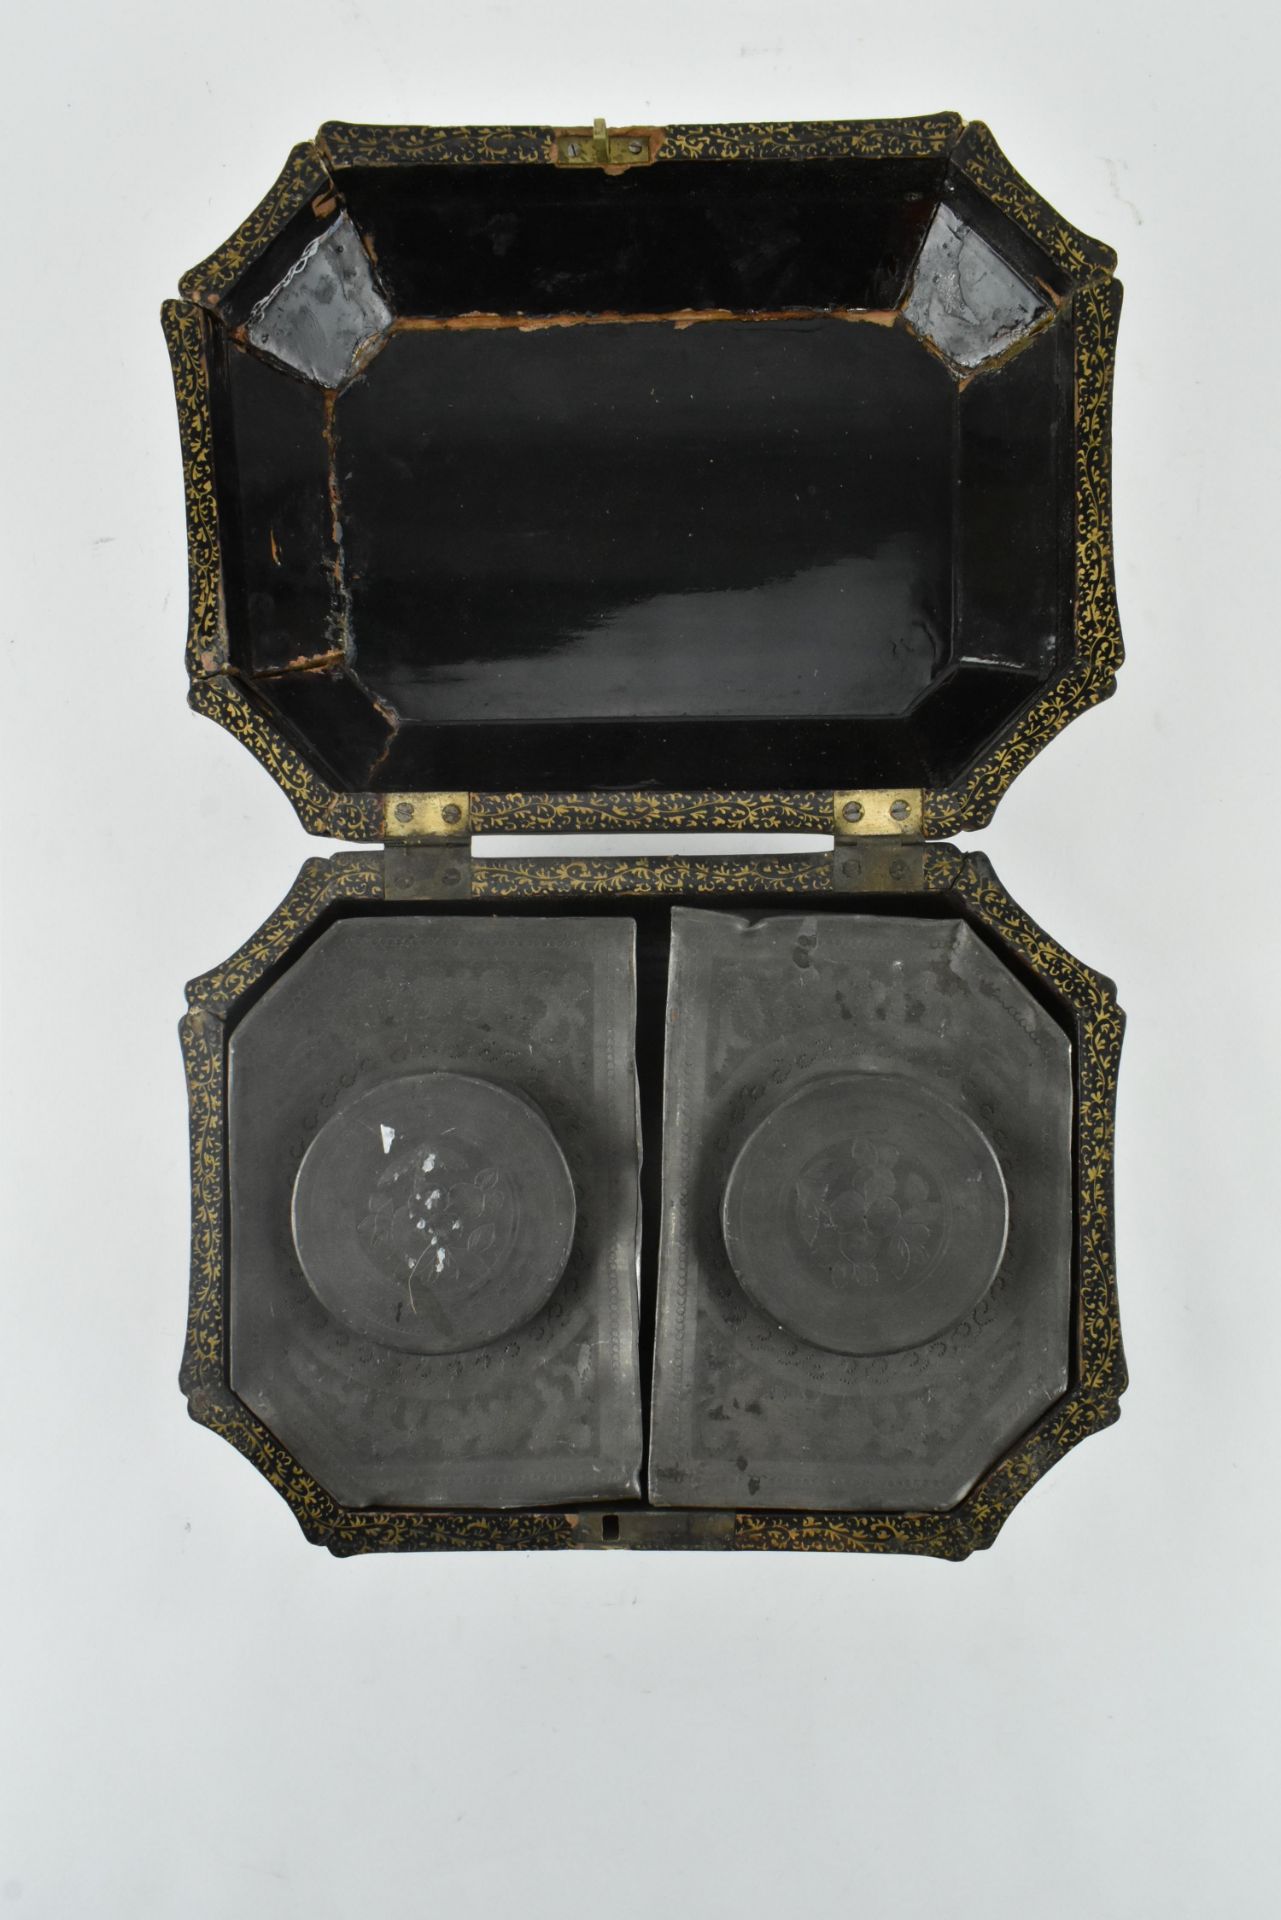 QING DYNASTY LACQUERED TEA CADDY BOX 清 茶盒 - Image 7 of 9